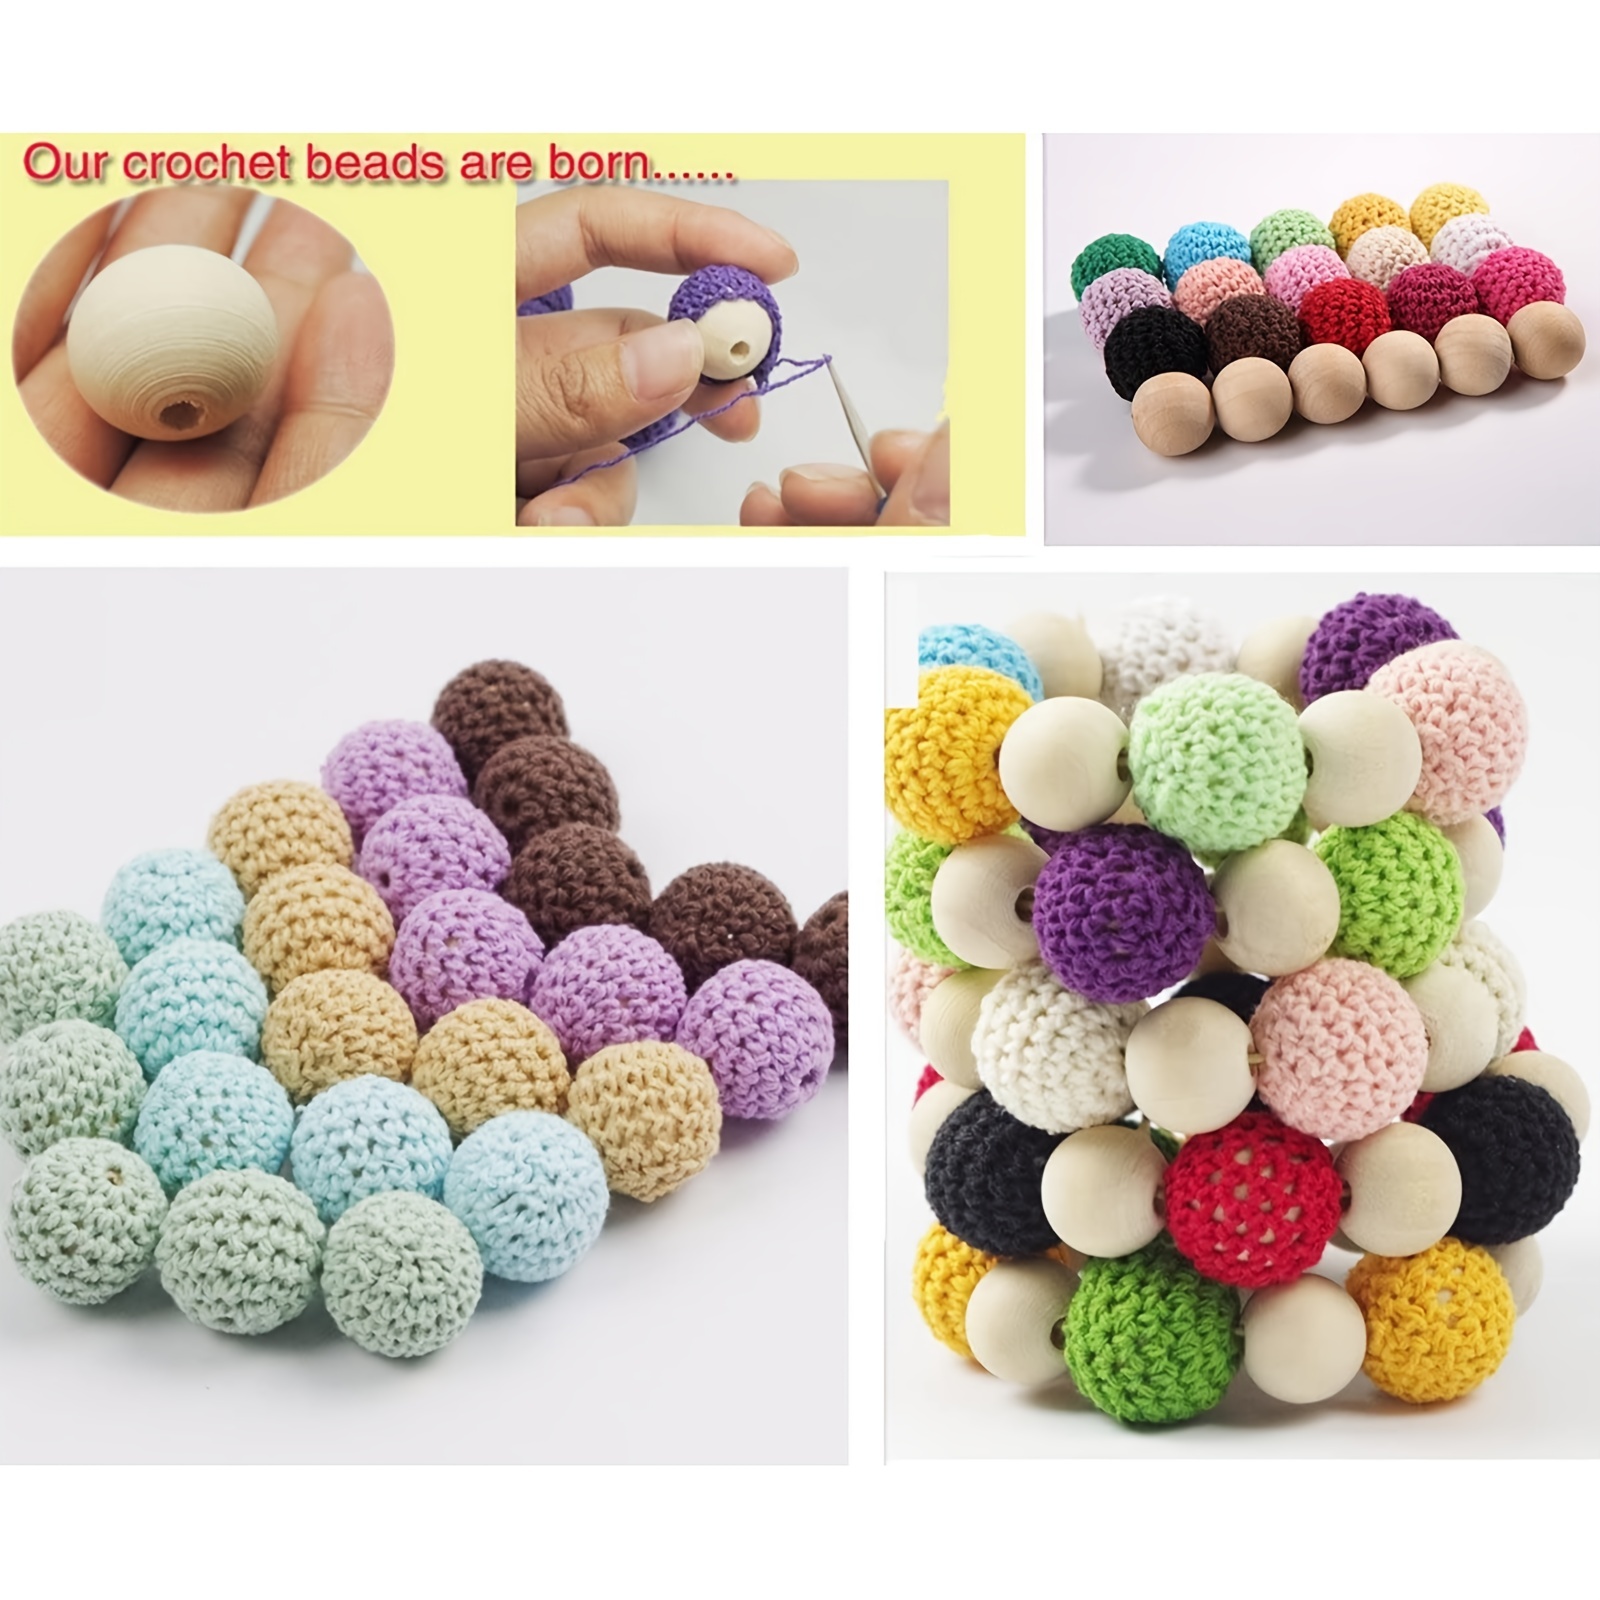 About 200 Pack 20mm Assorted Color Wood Beads - MeiMeiDa 20mm Round  Colorful Wooden Beads with 4mm Hole, Painted Wooden Crafts Spacer Beads for  Kids